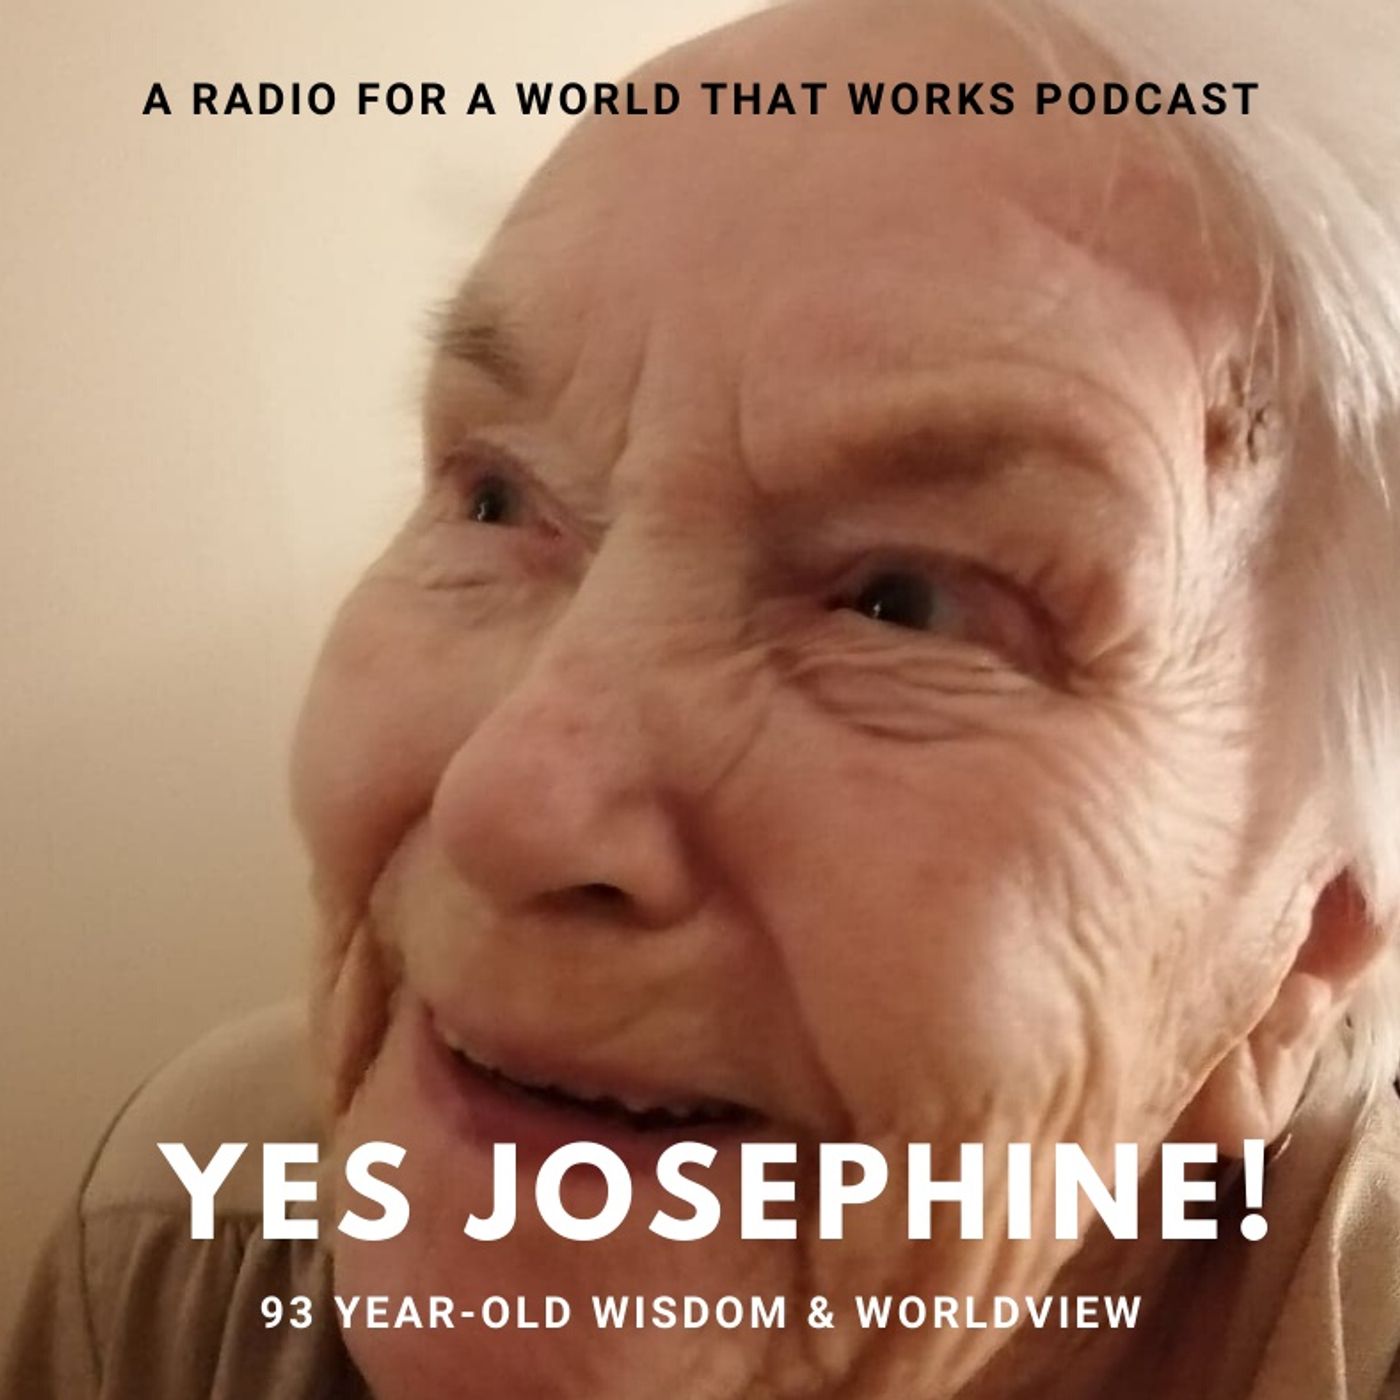 Yes Josephine! - The Life Lessons of a 93 Year-Old